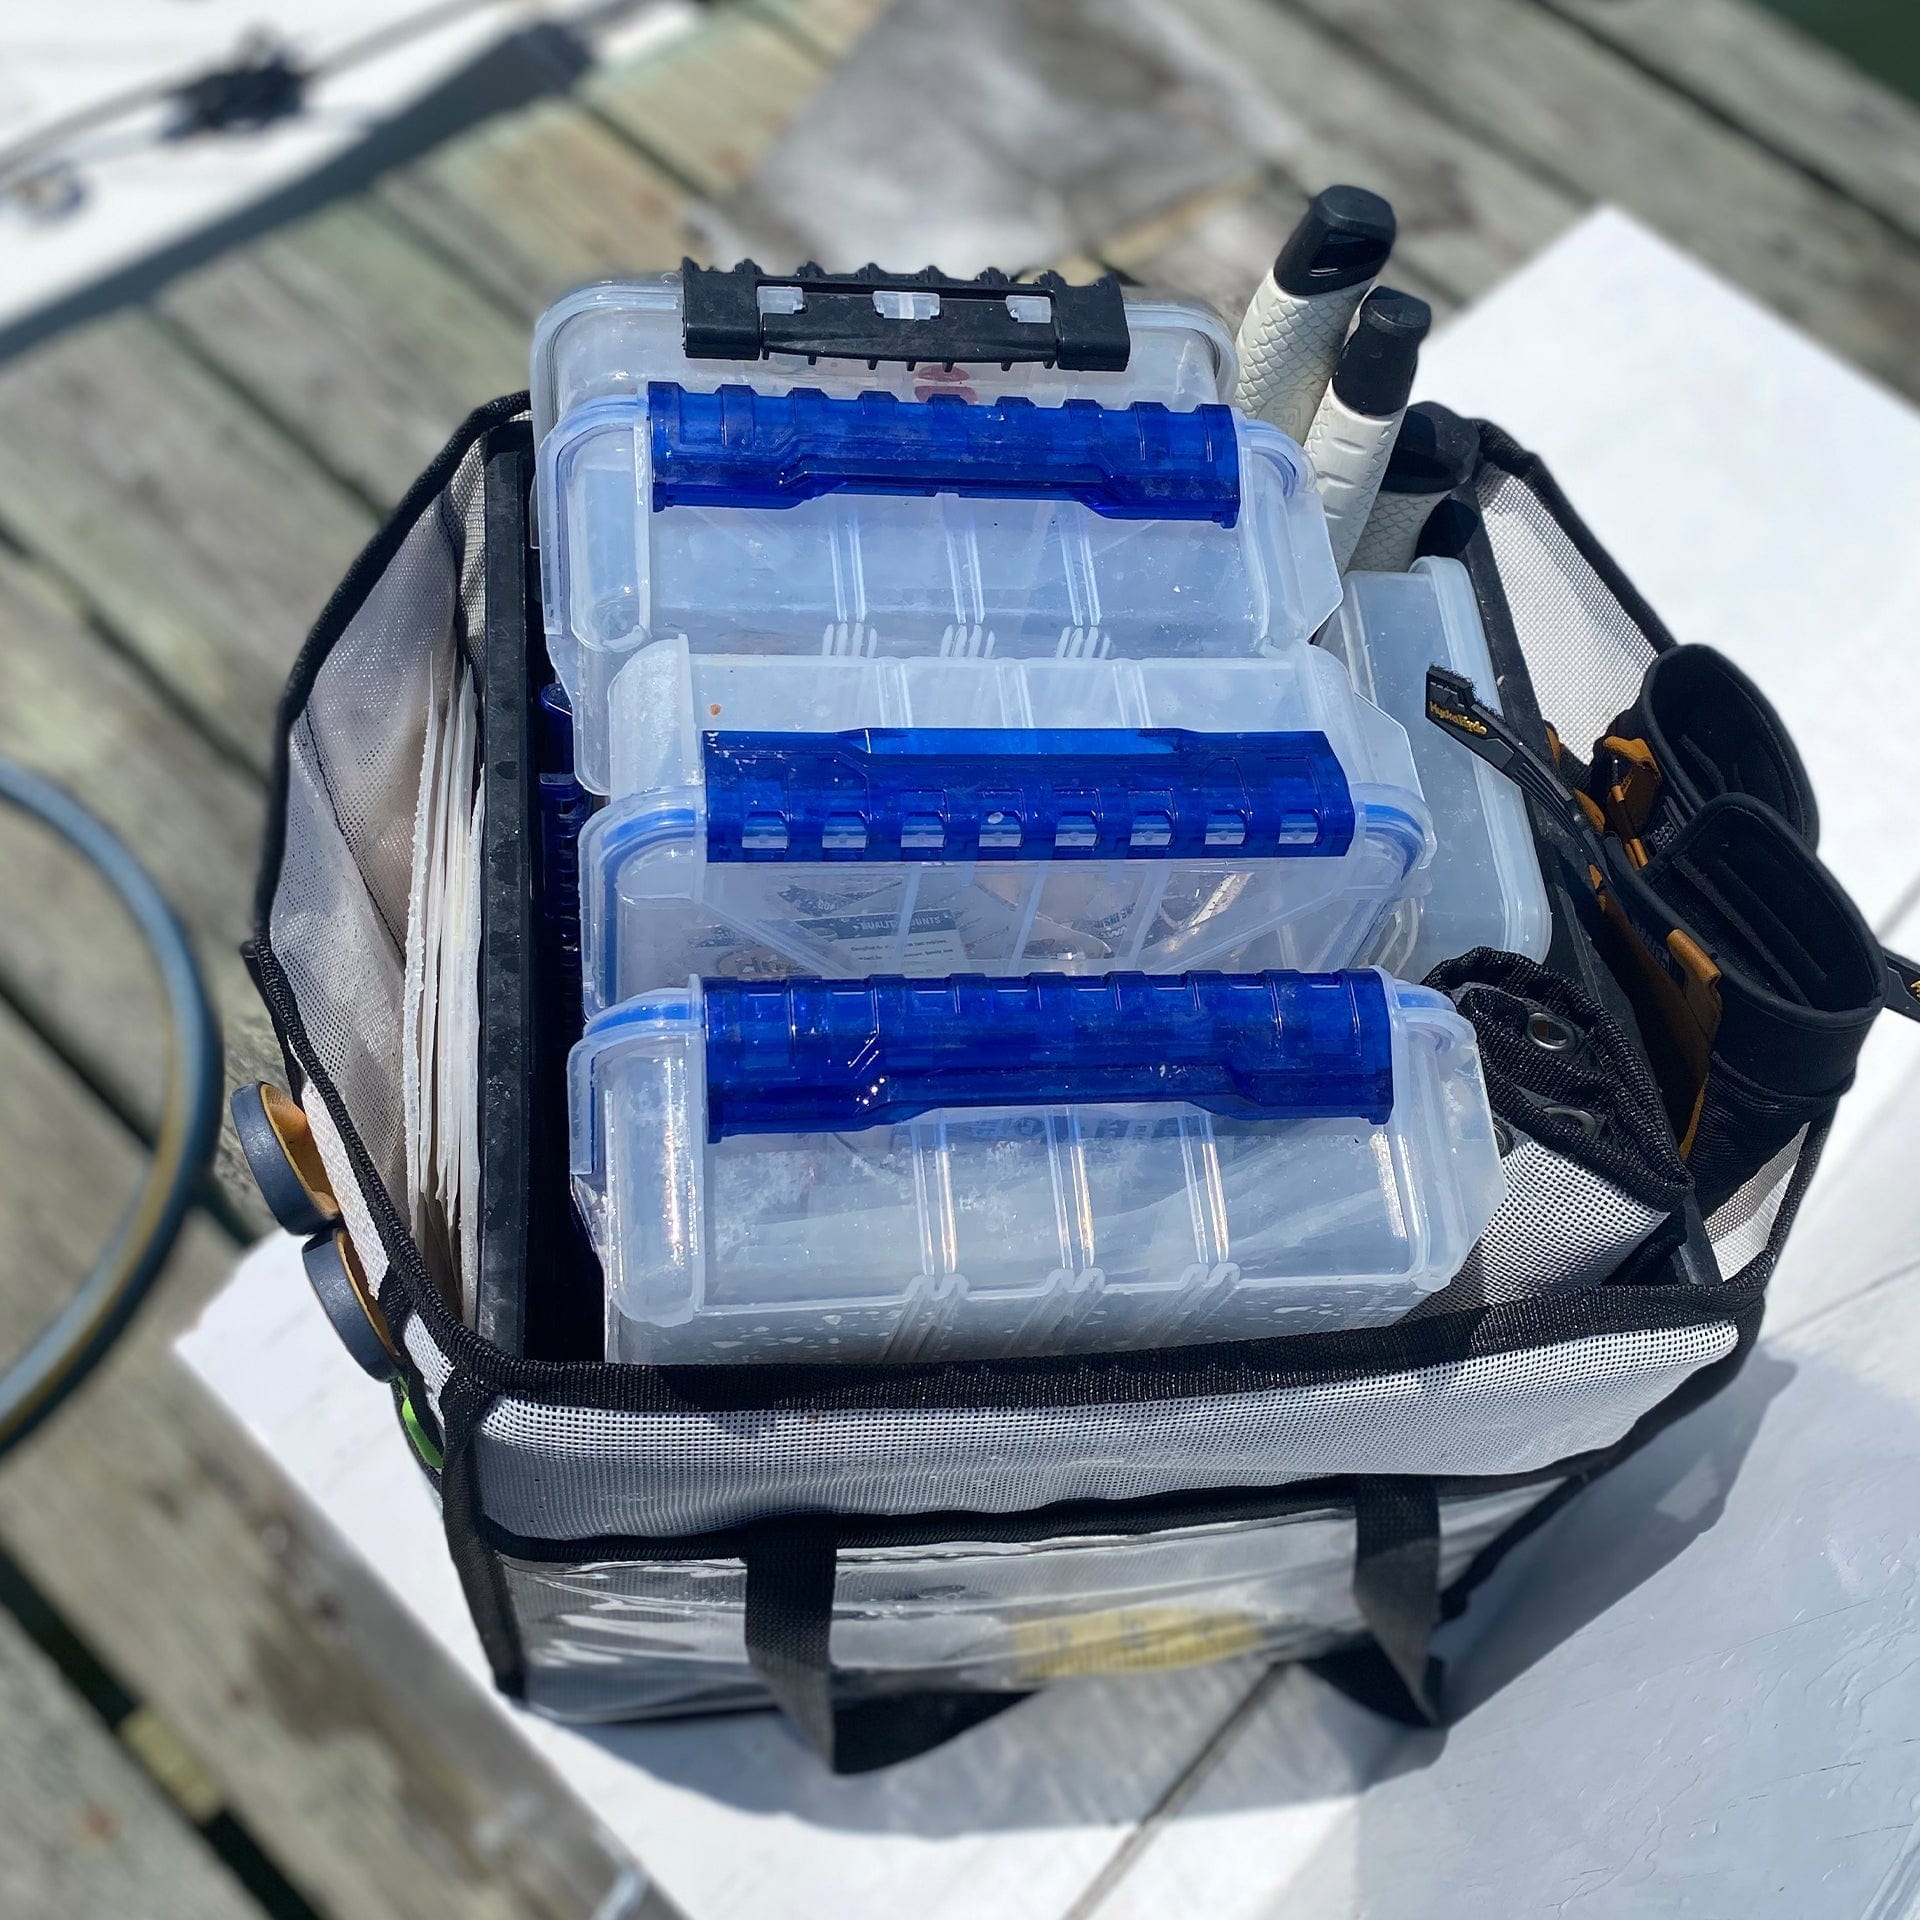 MESH CRATE STORAGE SYSTEM (MESH BAG ONLY) - The Saltwater Edge